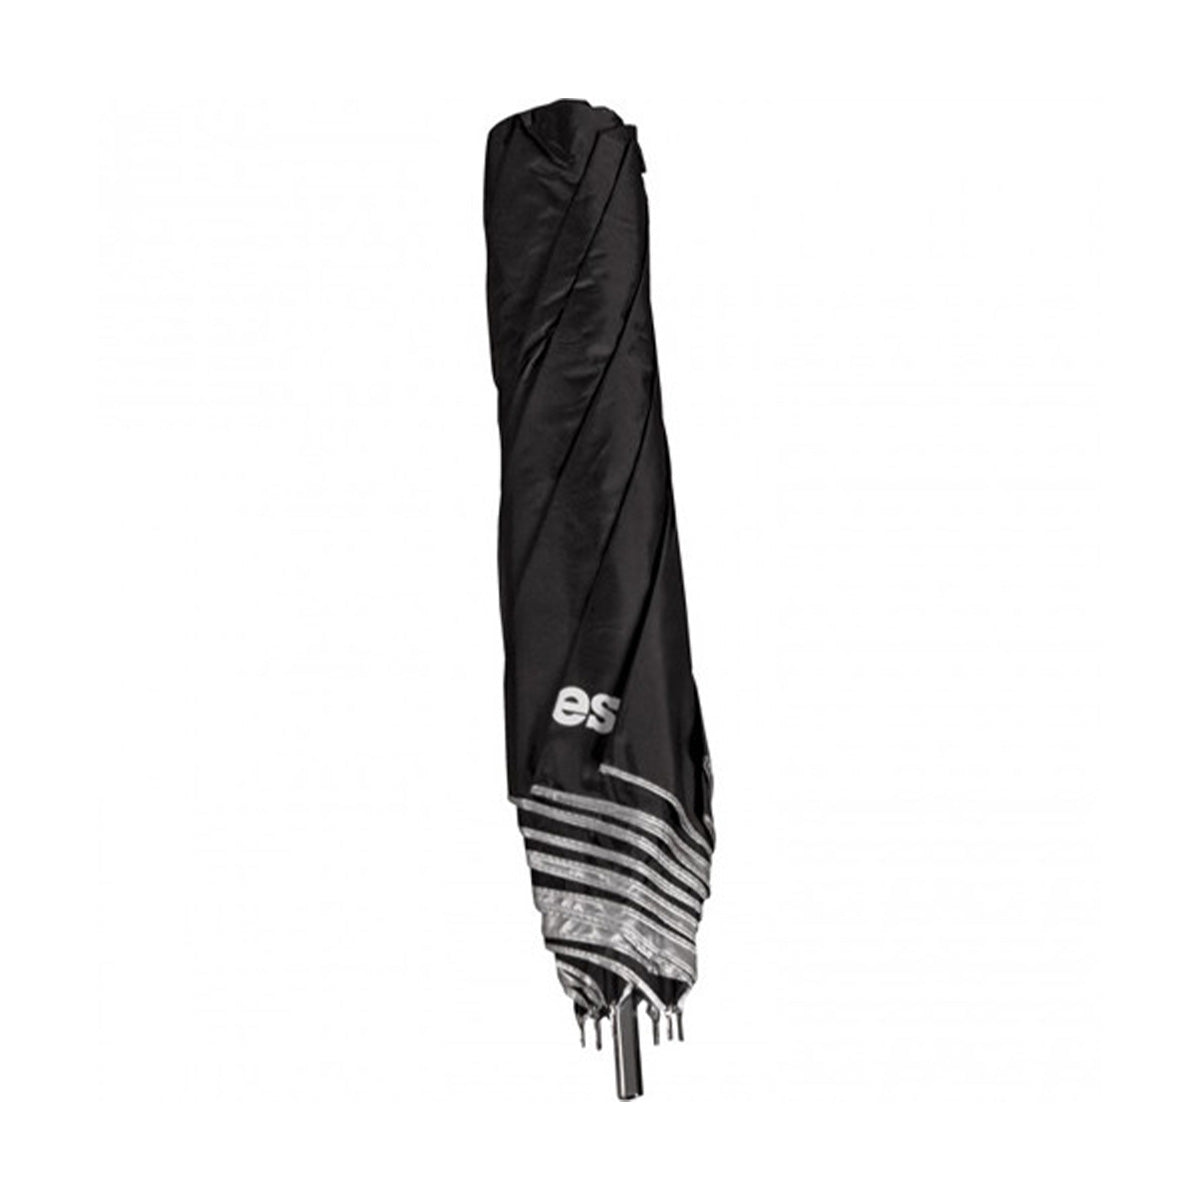 Westcott 43" Soft Silver Bounce Collapsible Umbrella